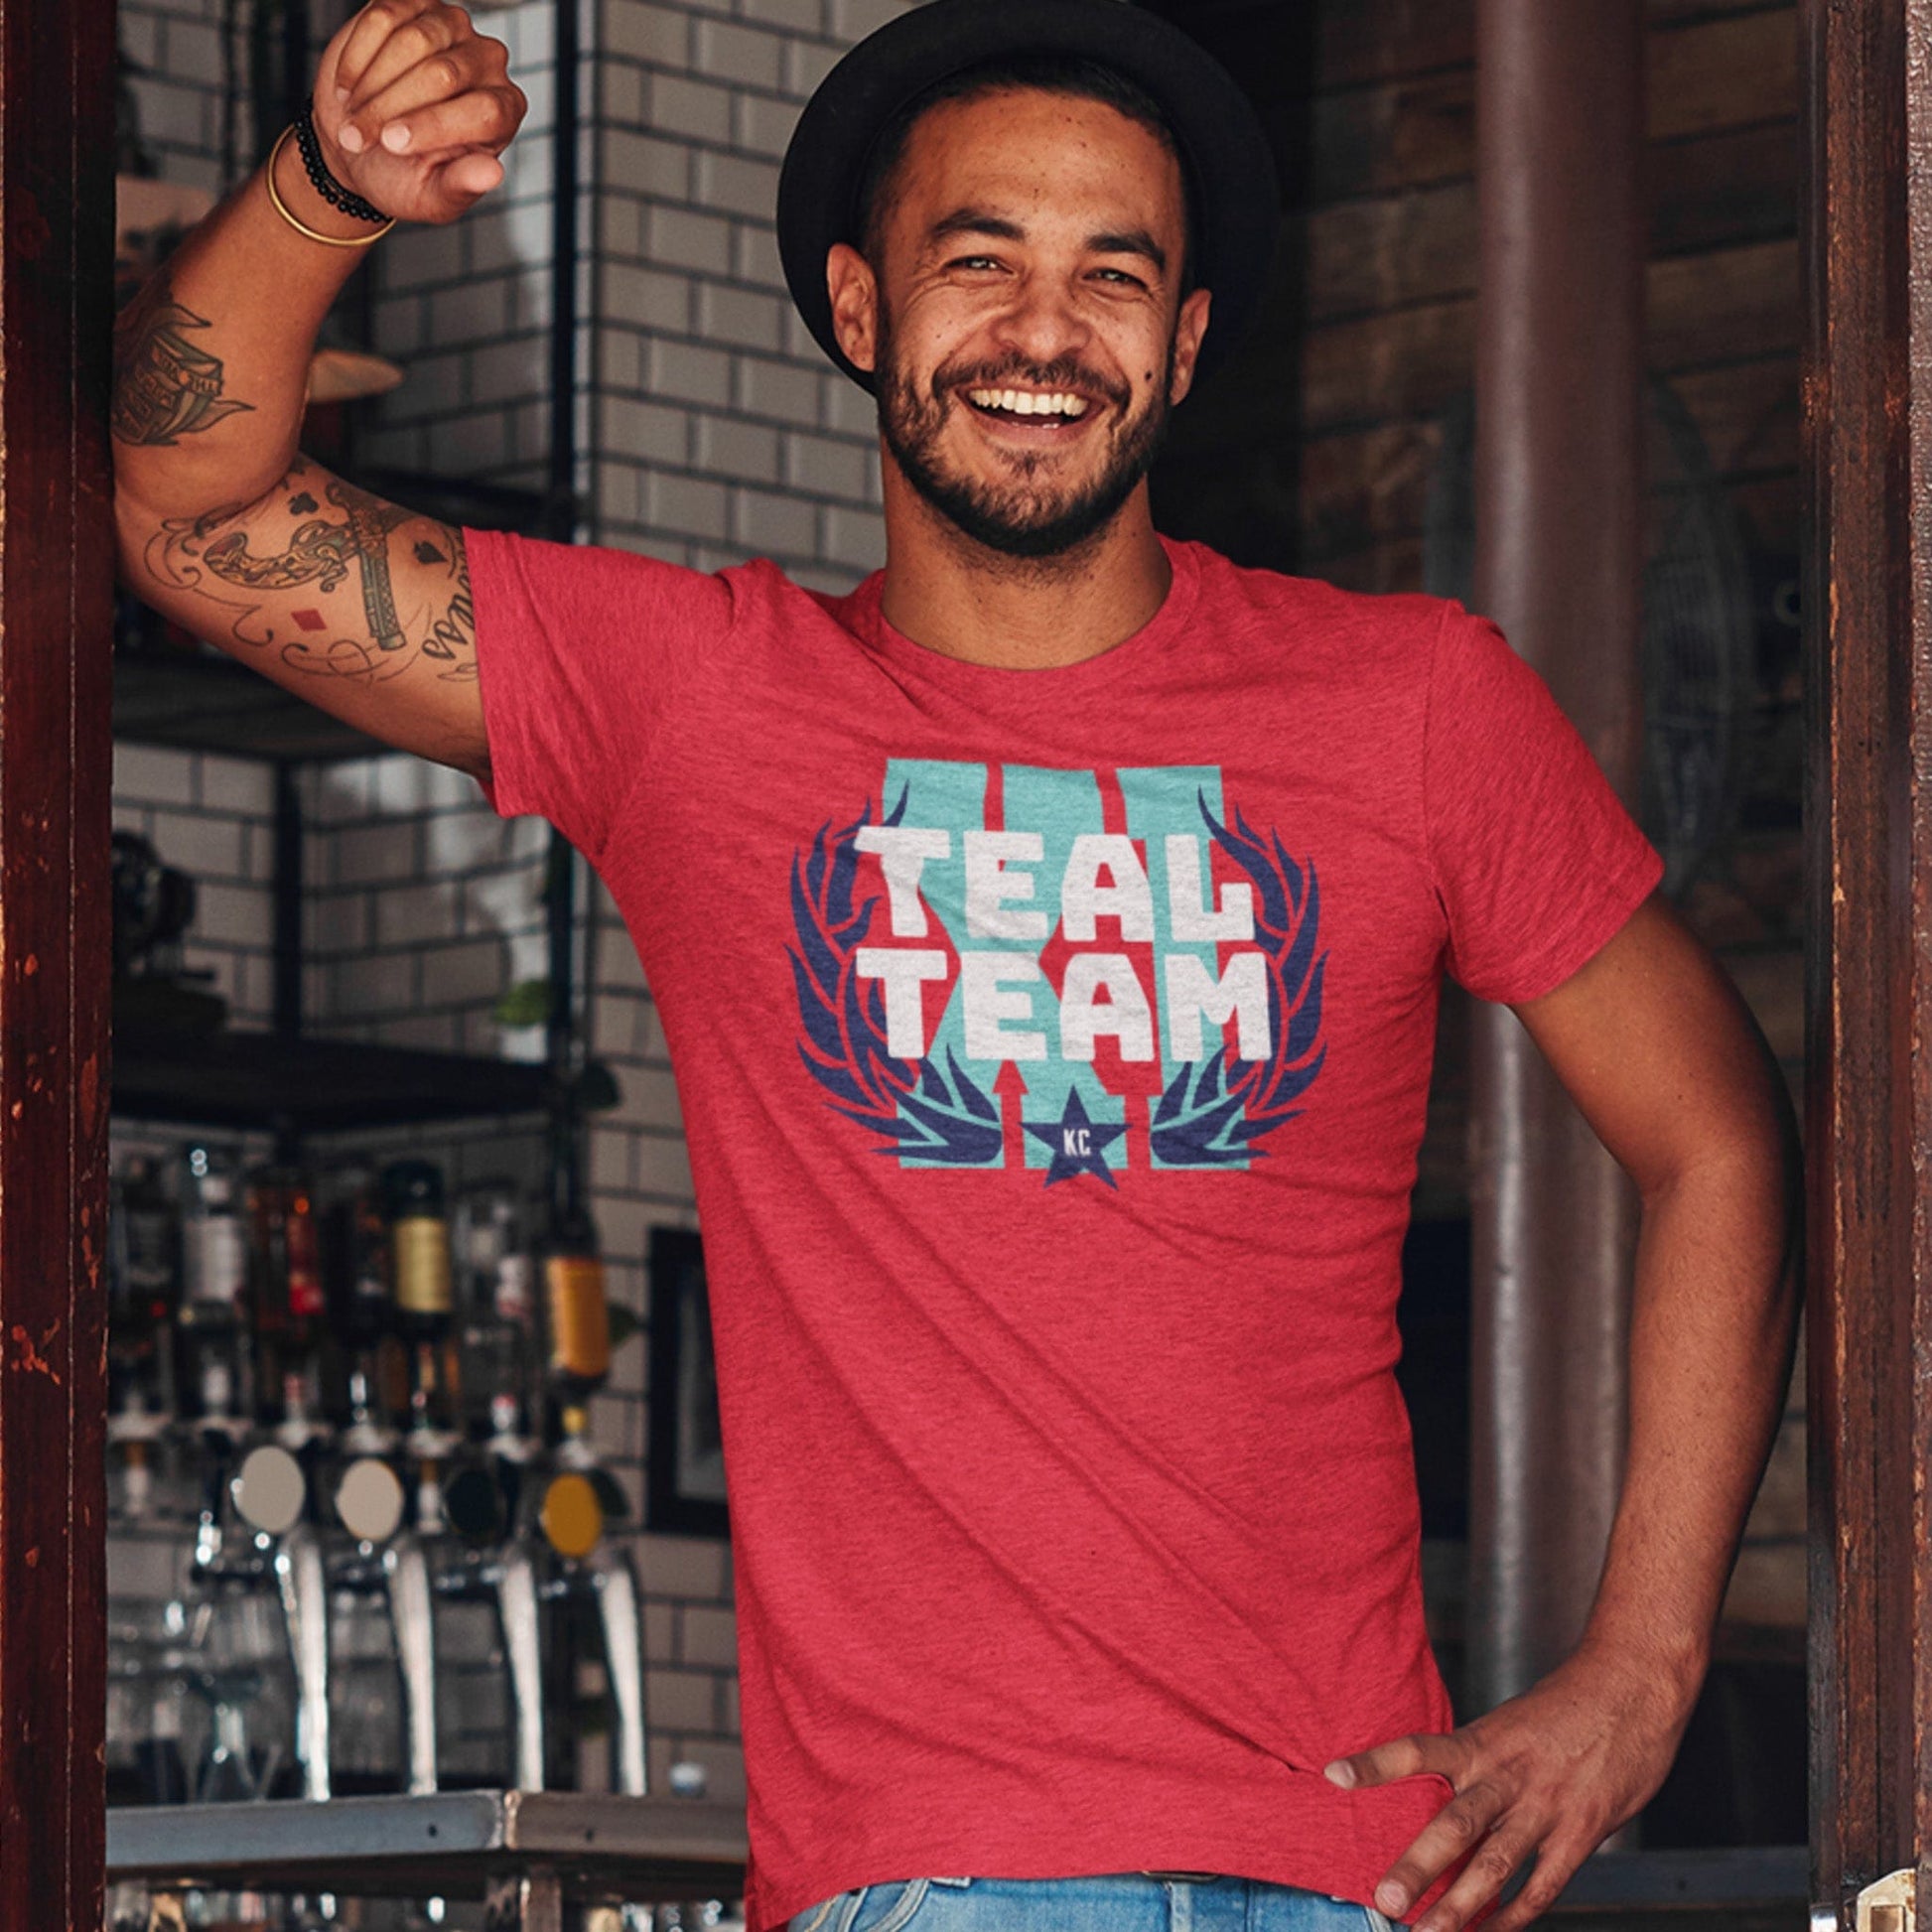 KC Swag Kansas City Current TEAL TEAM X! on heather red unisex t-shirt worn by male model leaning on doorway into pub.